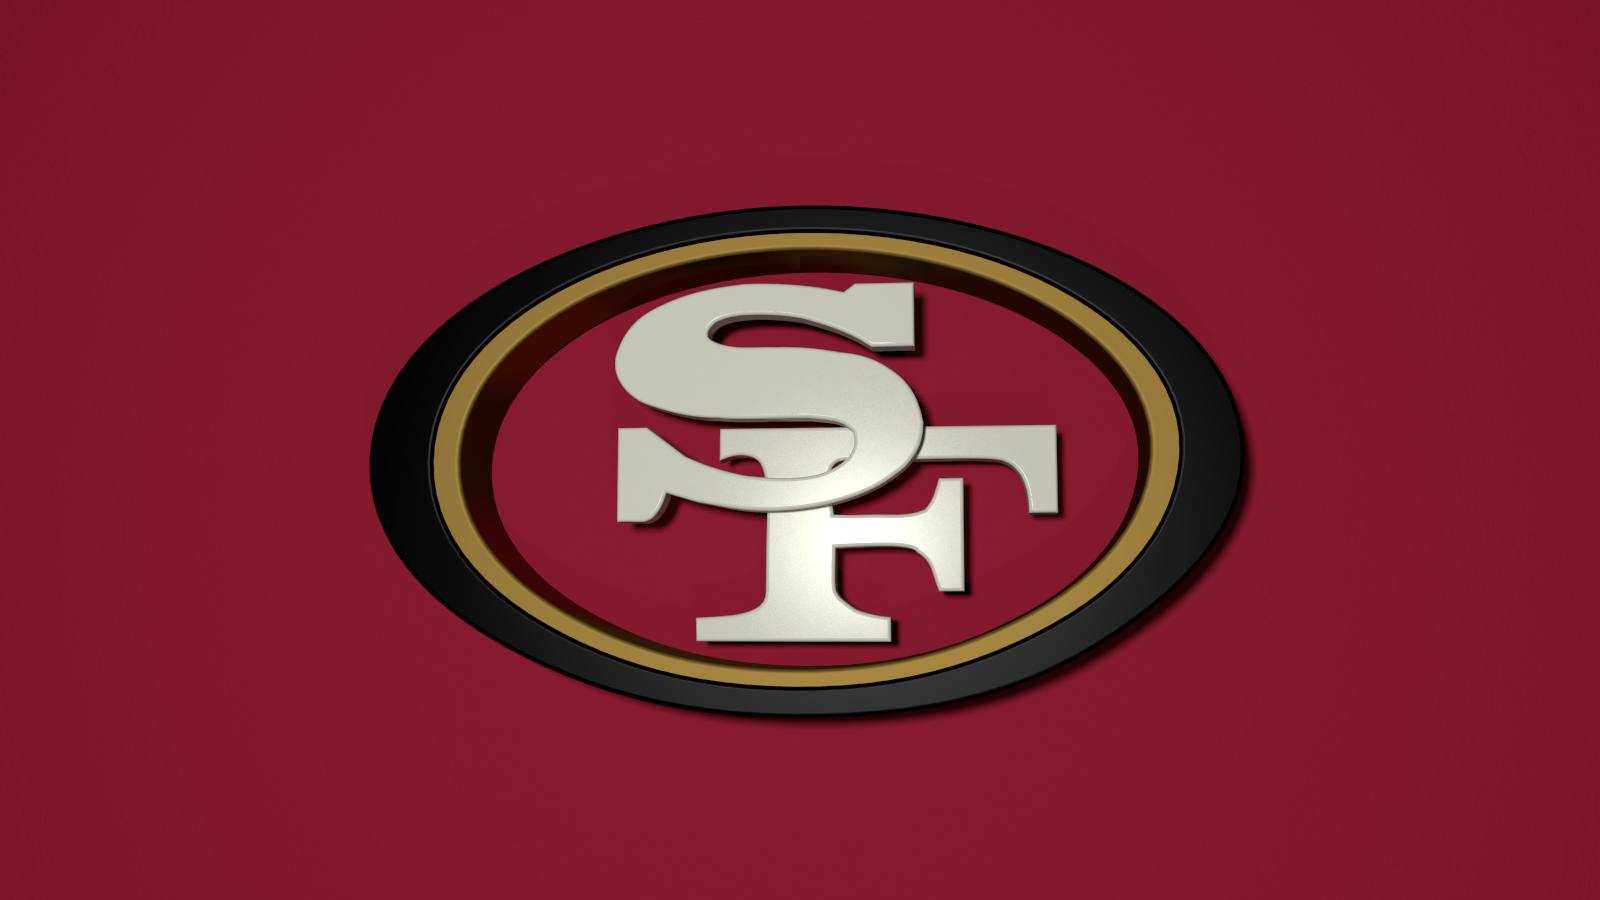 POV-Ray: Newsgroups: povray.binaries.images: Go Niners: Re: Go Niners.